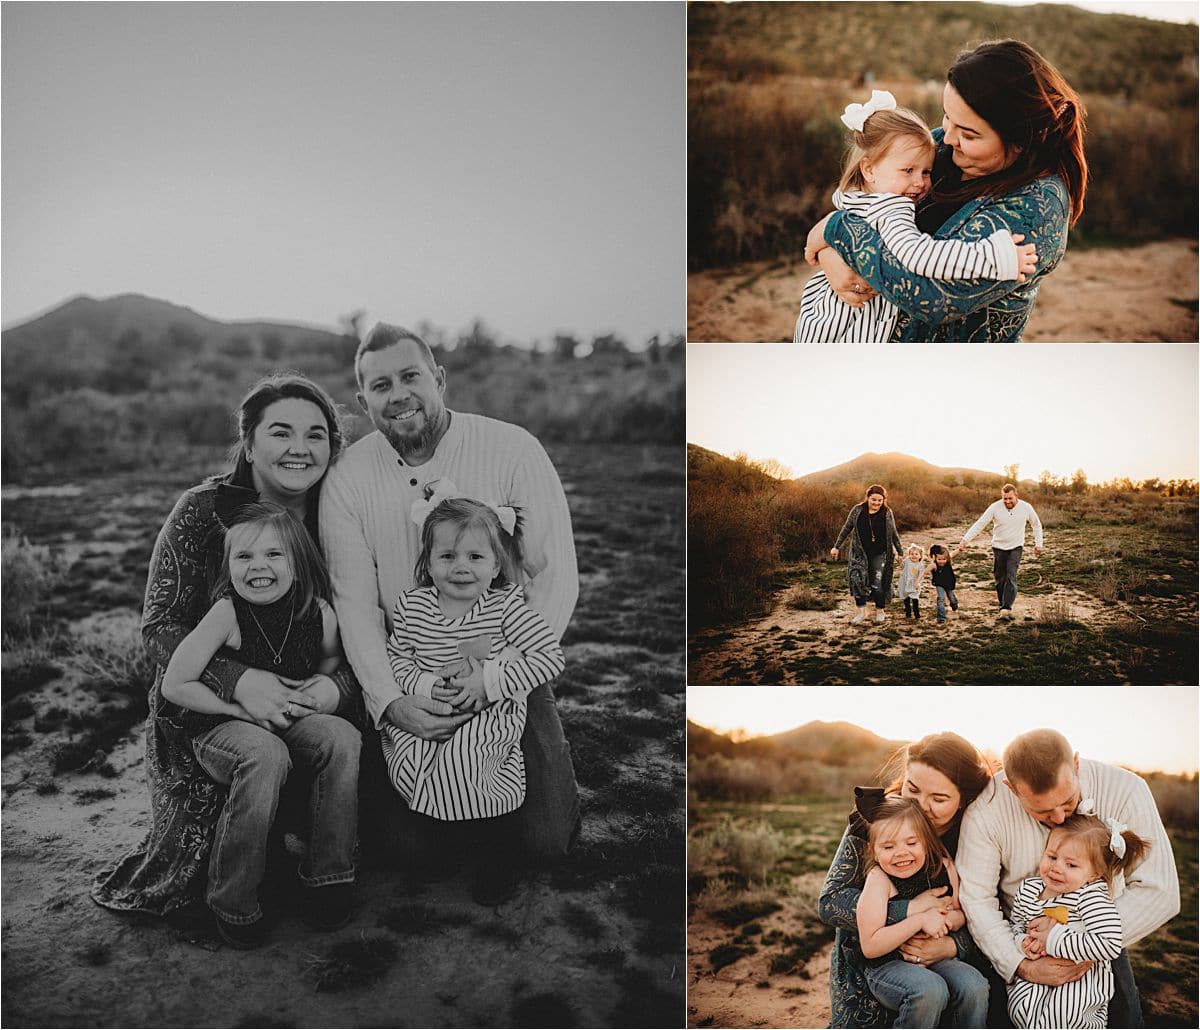 Sunset Mountain Session Family Snuggling